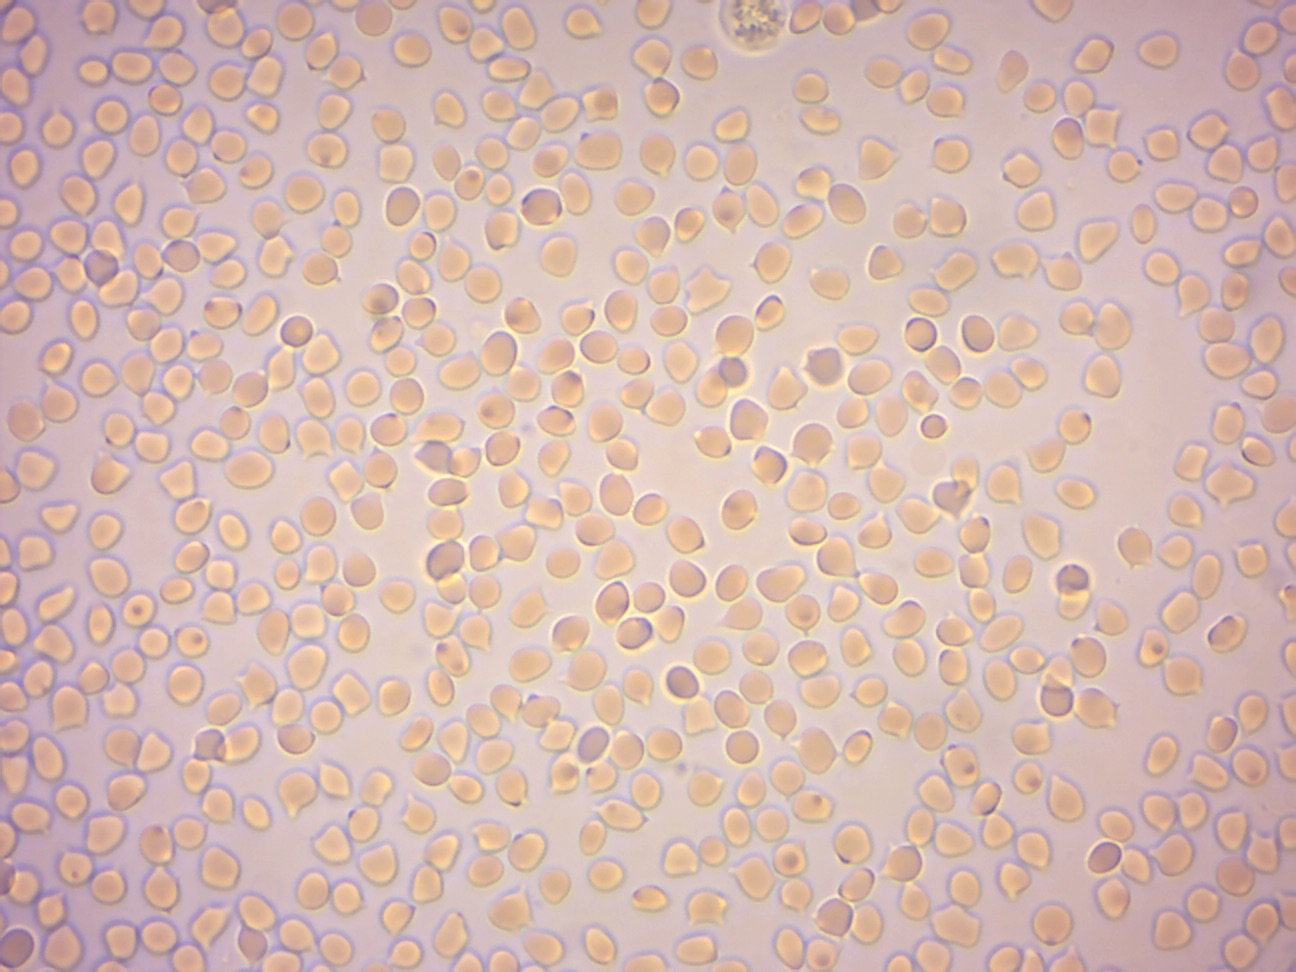 Red blood cells from sheep in distilled water.